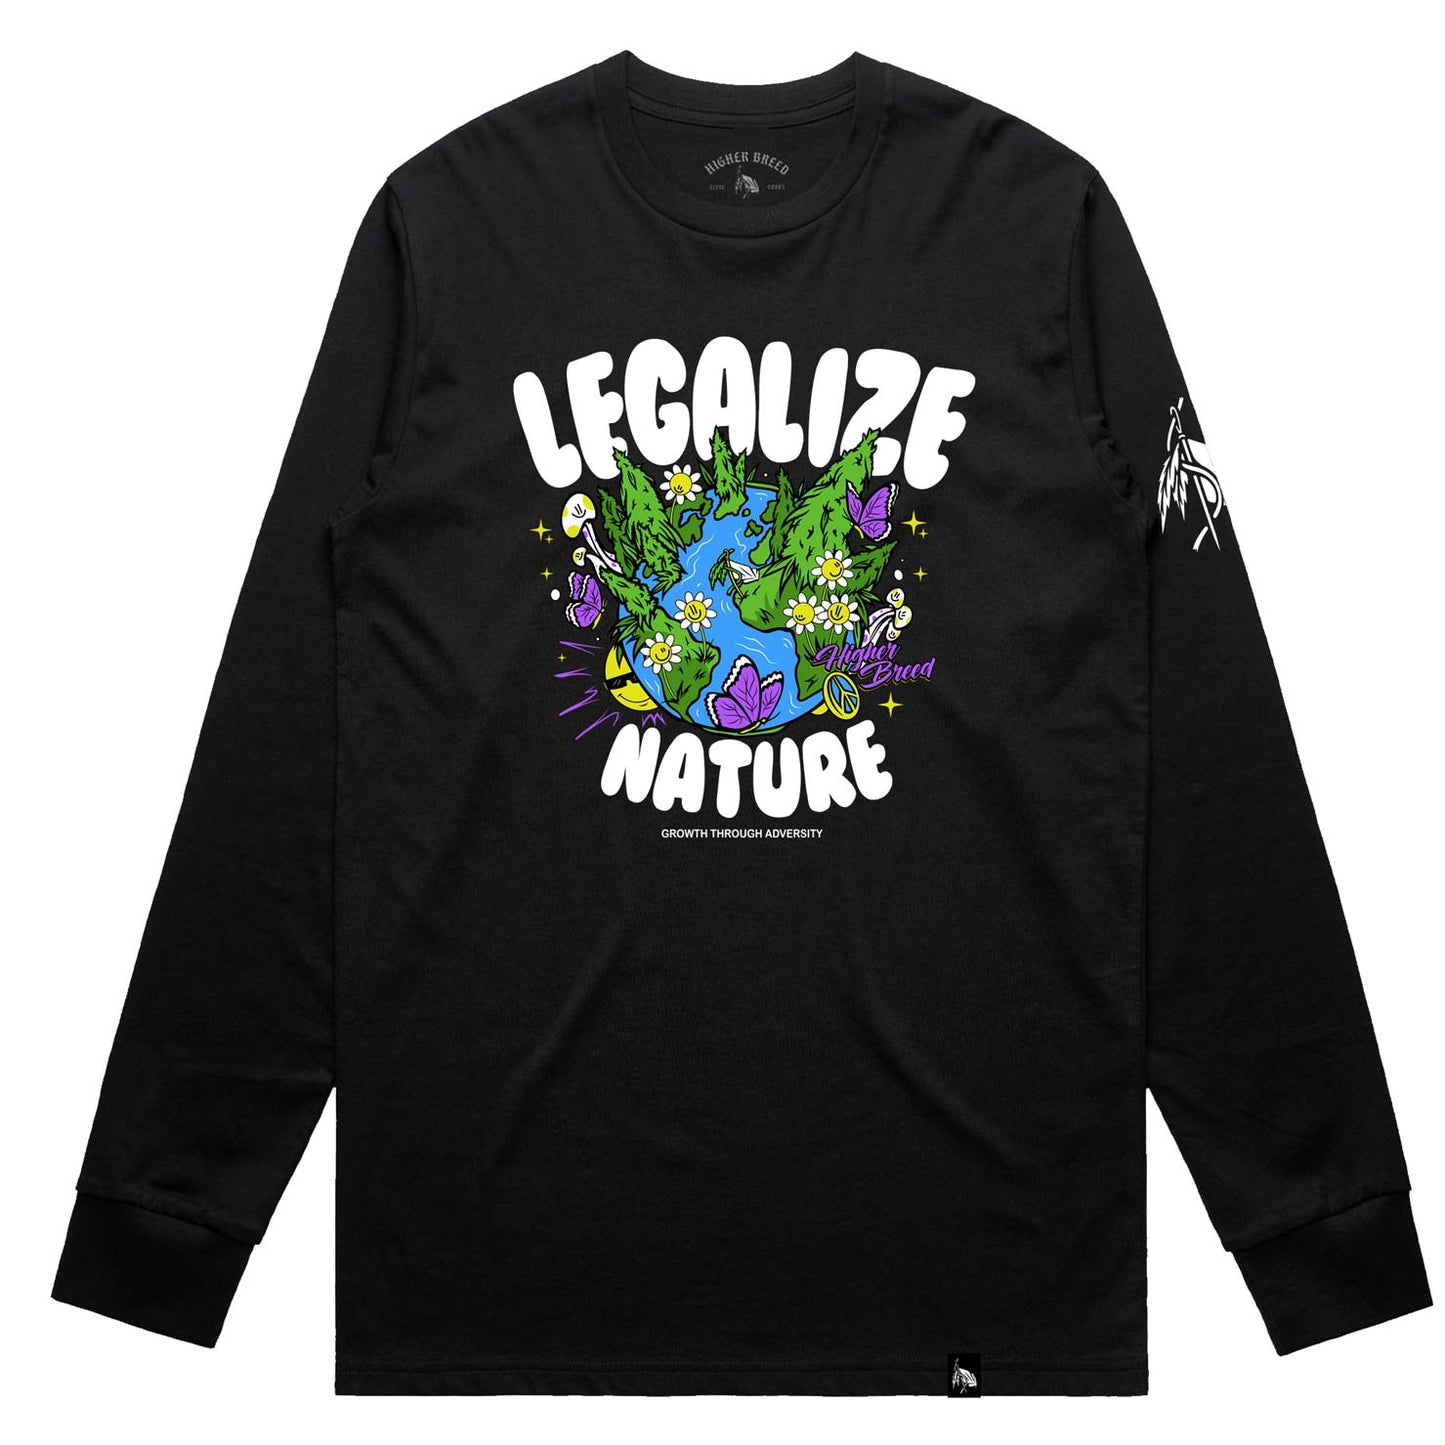 Higher Breed - Legalize Nature - Long Sleeve